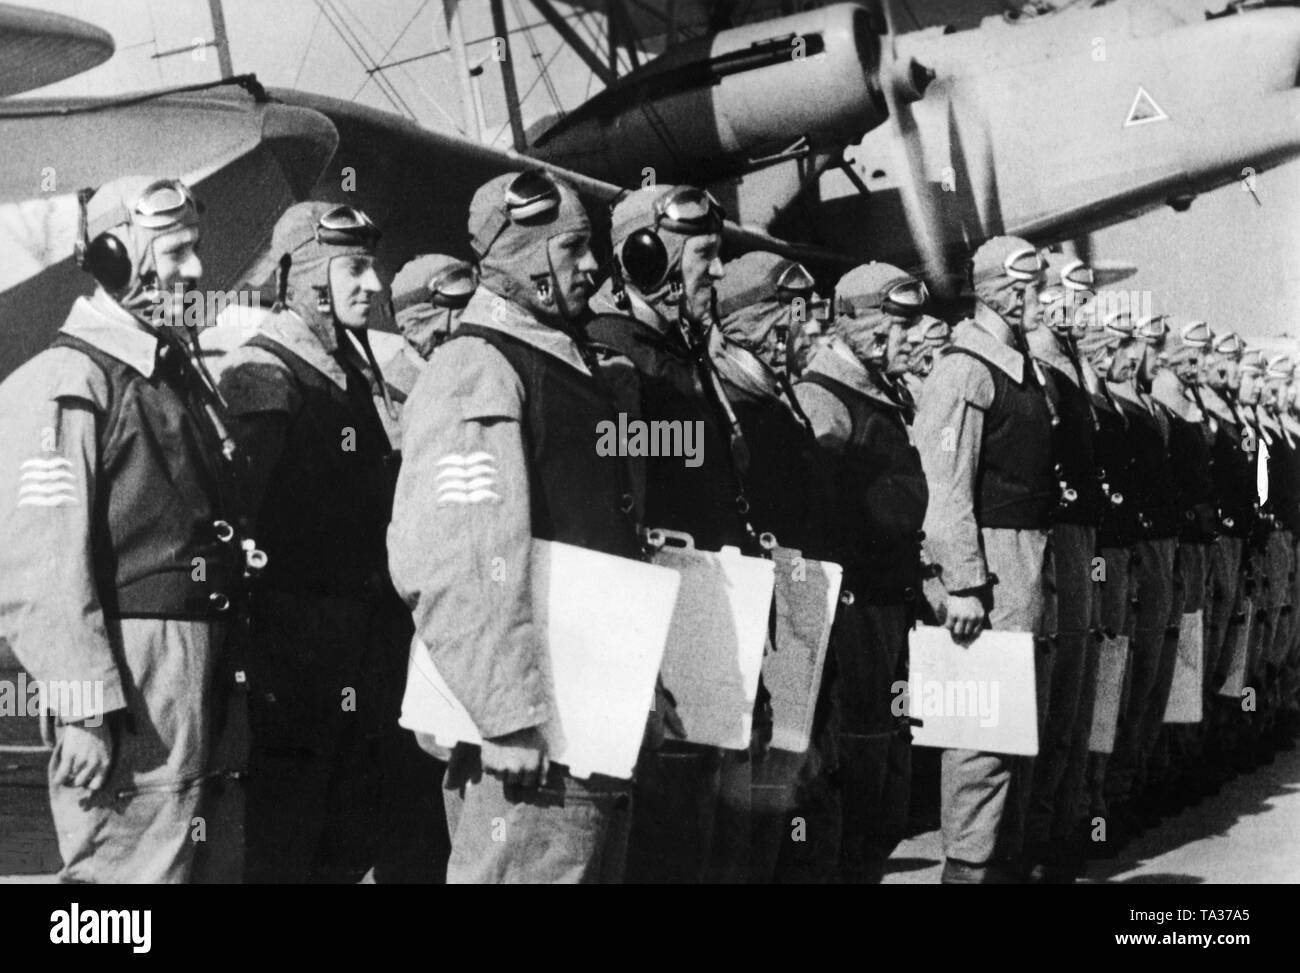 Film scene from the short 'documentary' called 'Flieger zur See' from (1938/1939), a propagandistic short film. The picture shows the crew who lined up for the issue of orders. The picture was published in 1939 in the newspaper 'Filmwelt'. Stock Photo